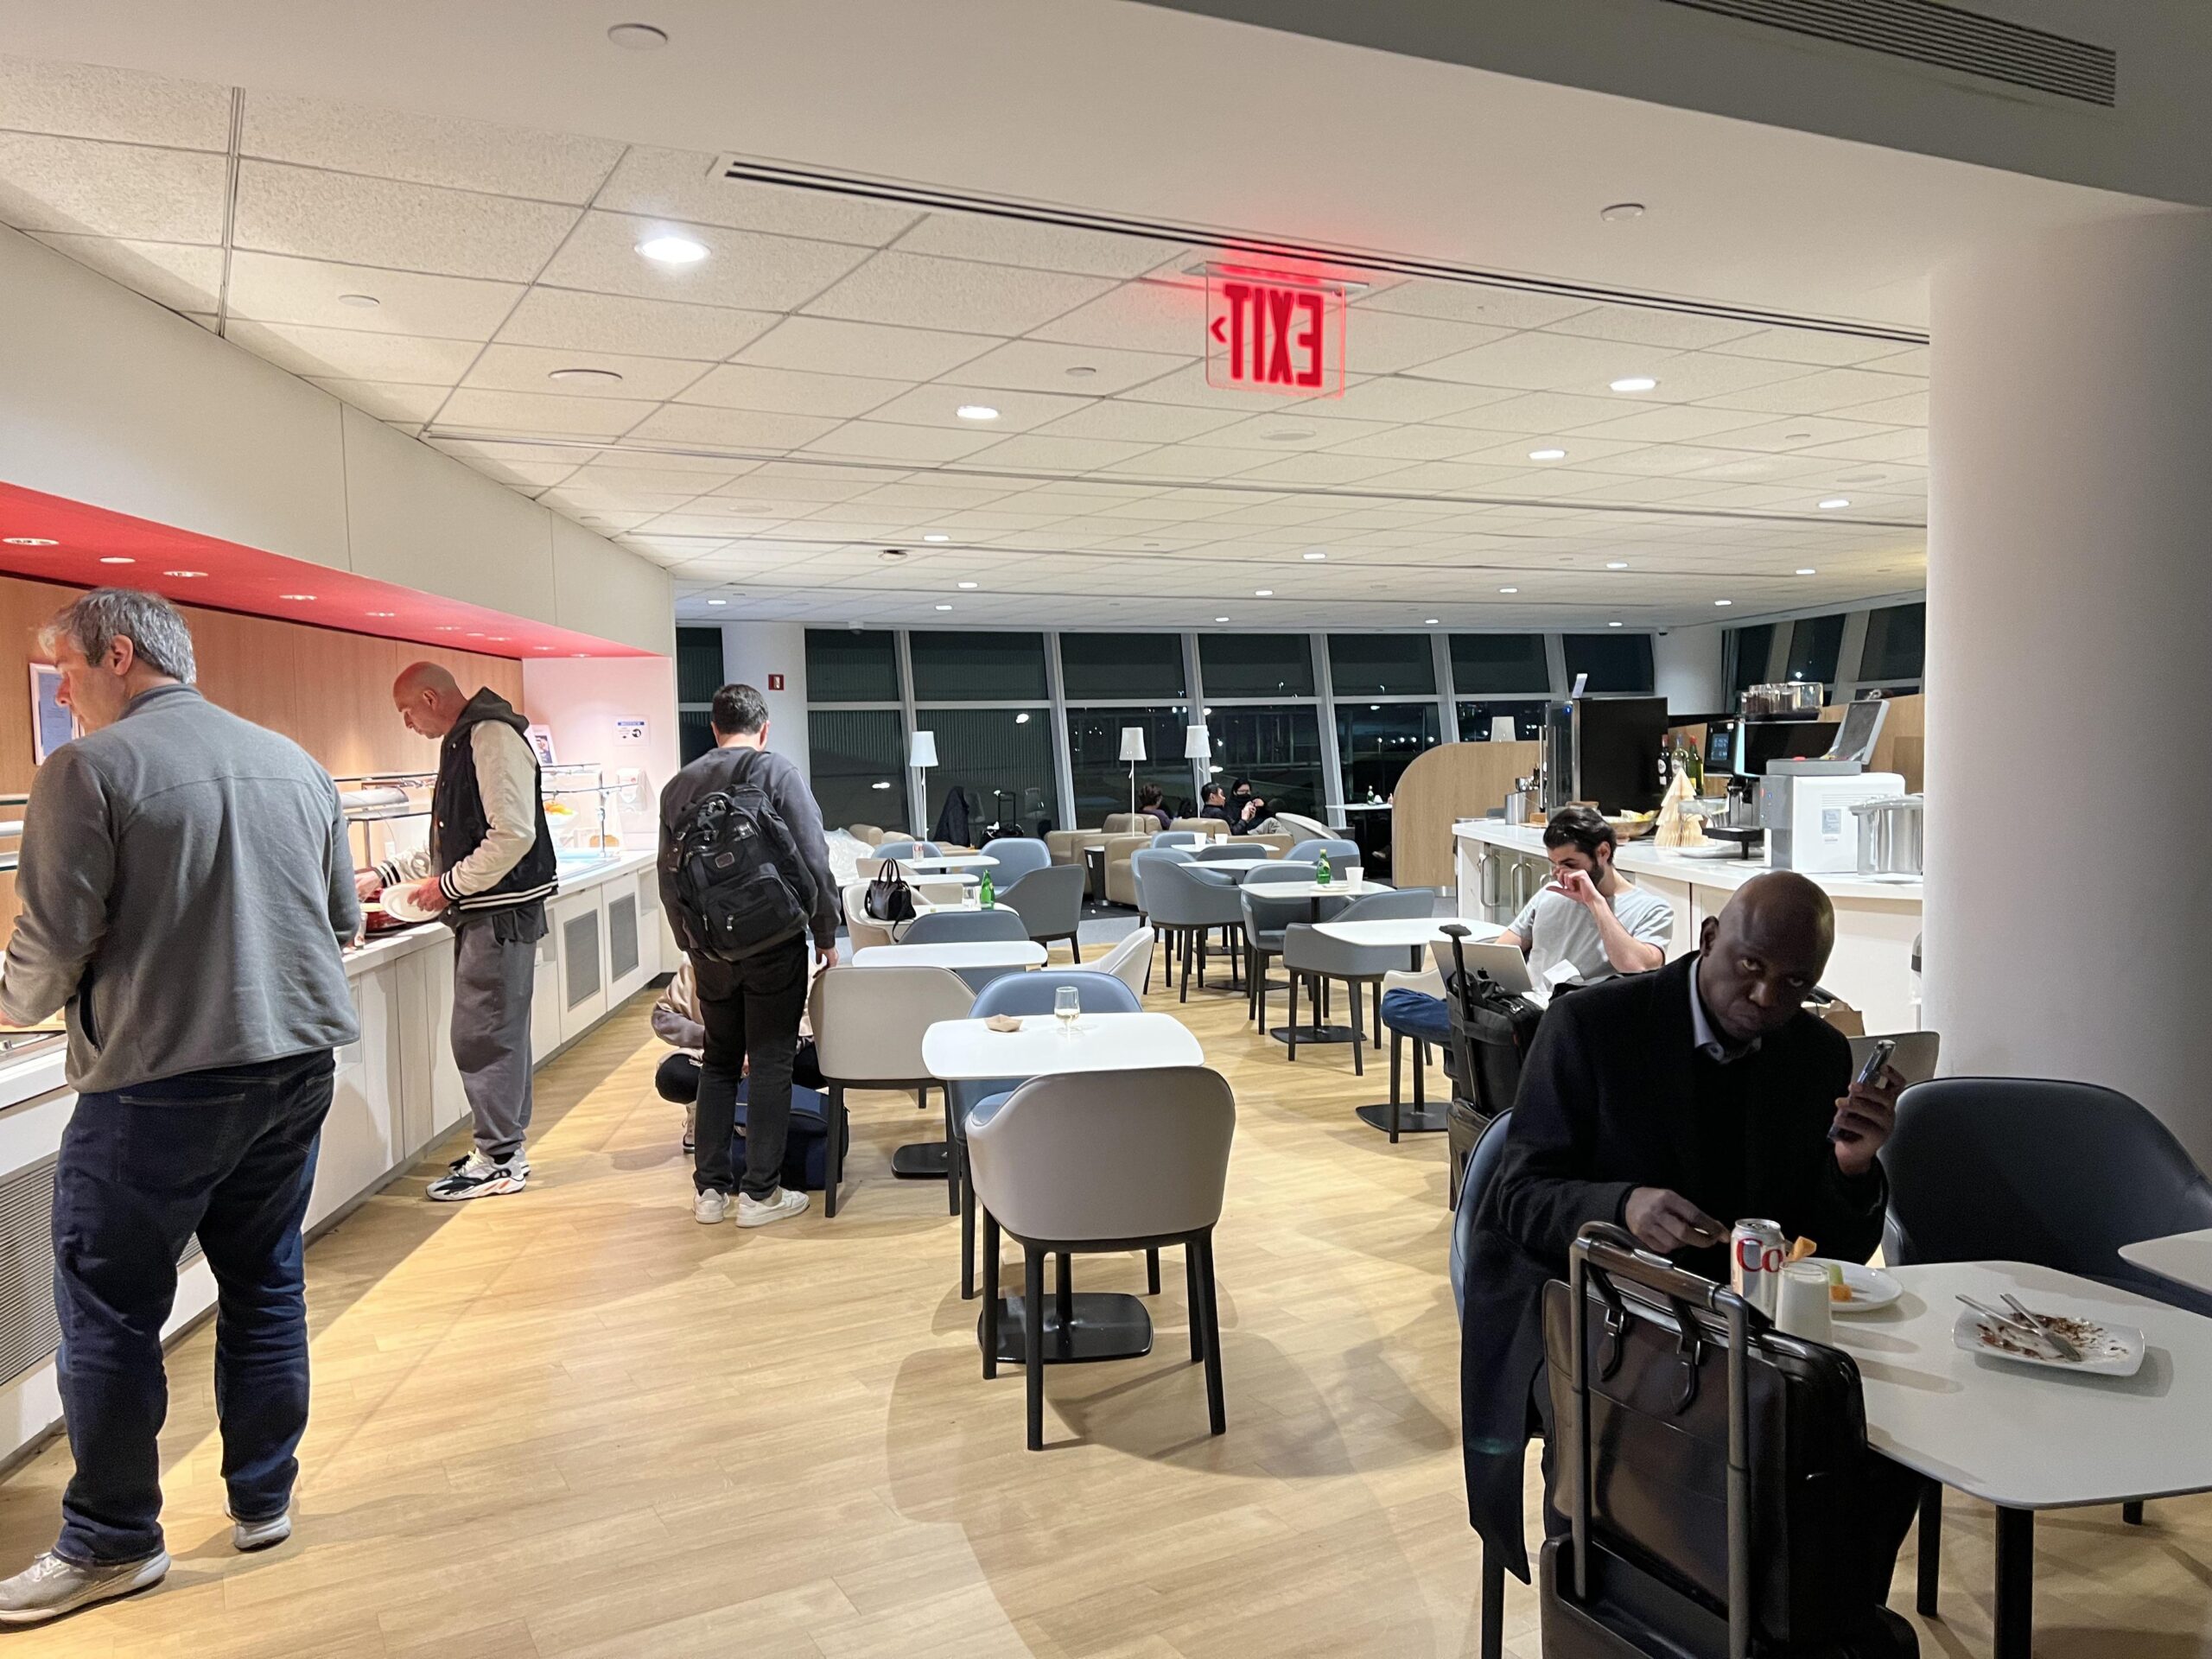 Air France Lounge in Jfk - Exclusive Review & Photos